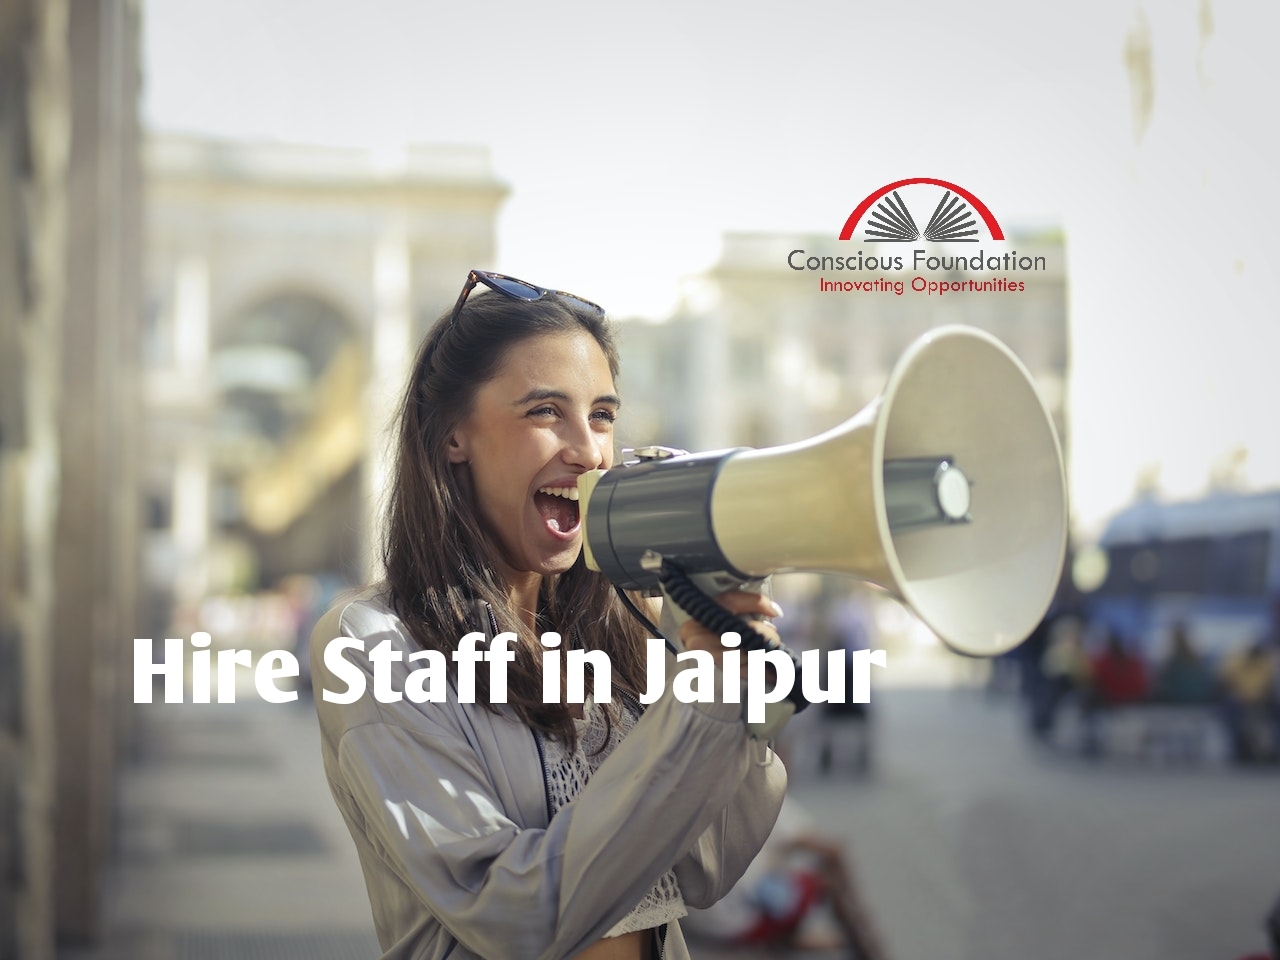 Hire-staff-in-jaipur-free-resume-search-conscious-foundation-candidate-looking-for-job-Jaipur-consultancy-free-1